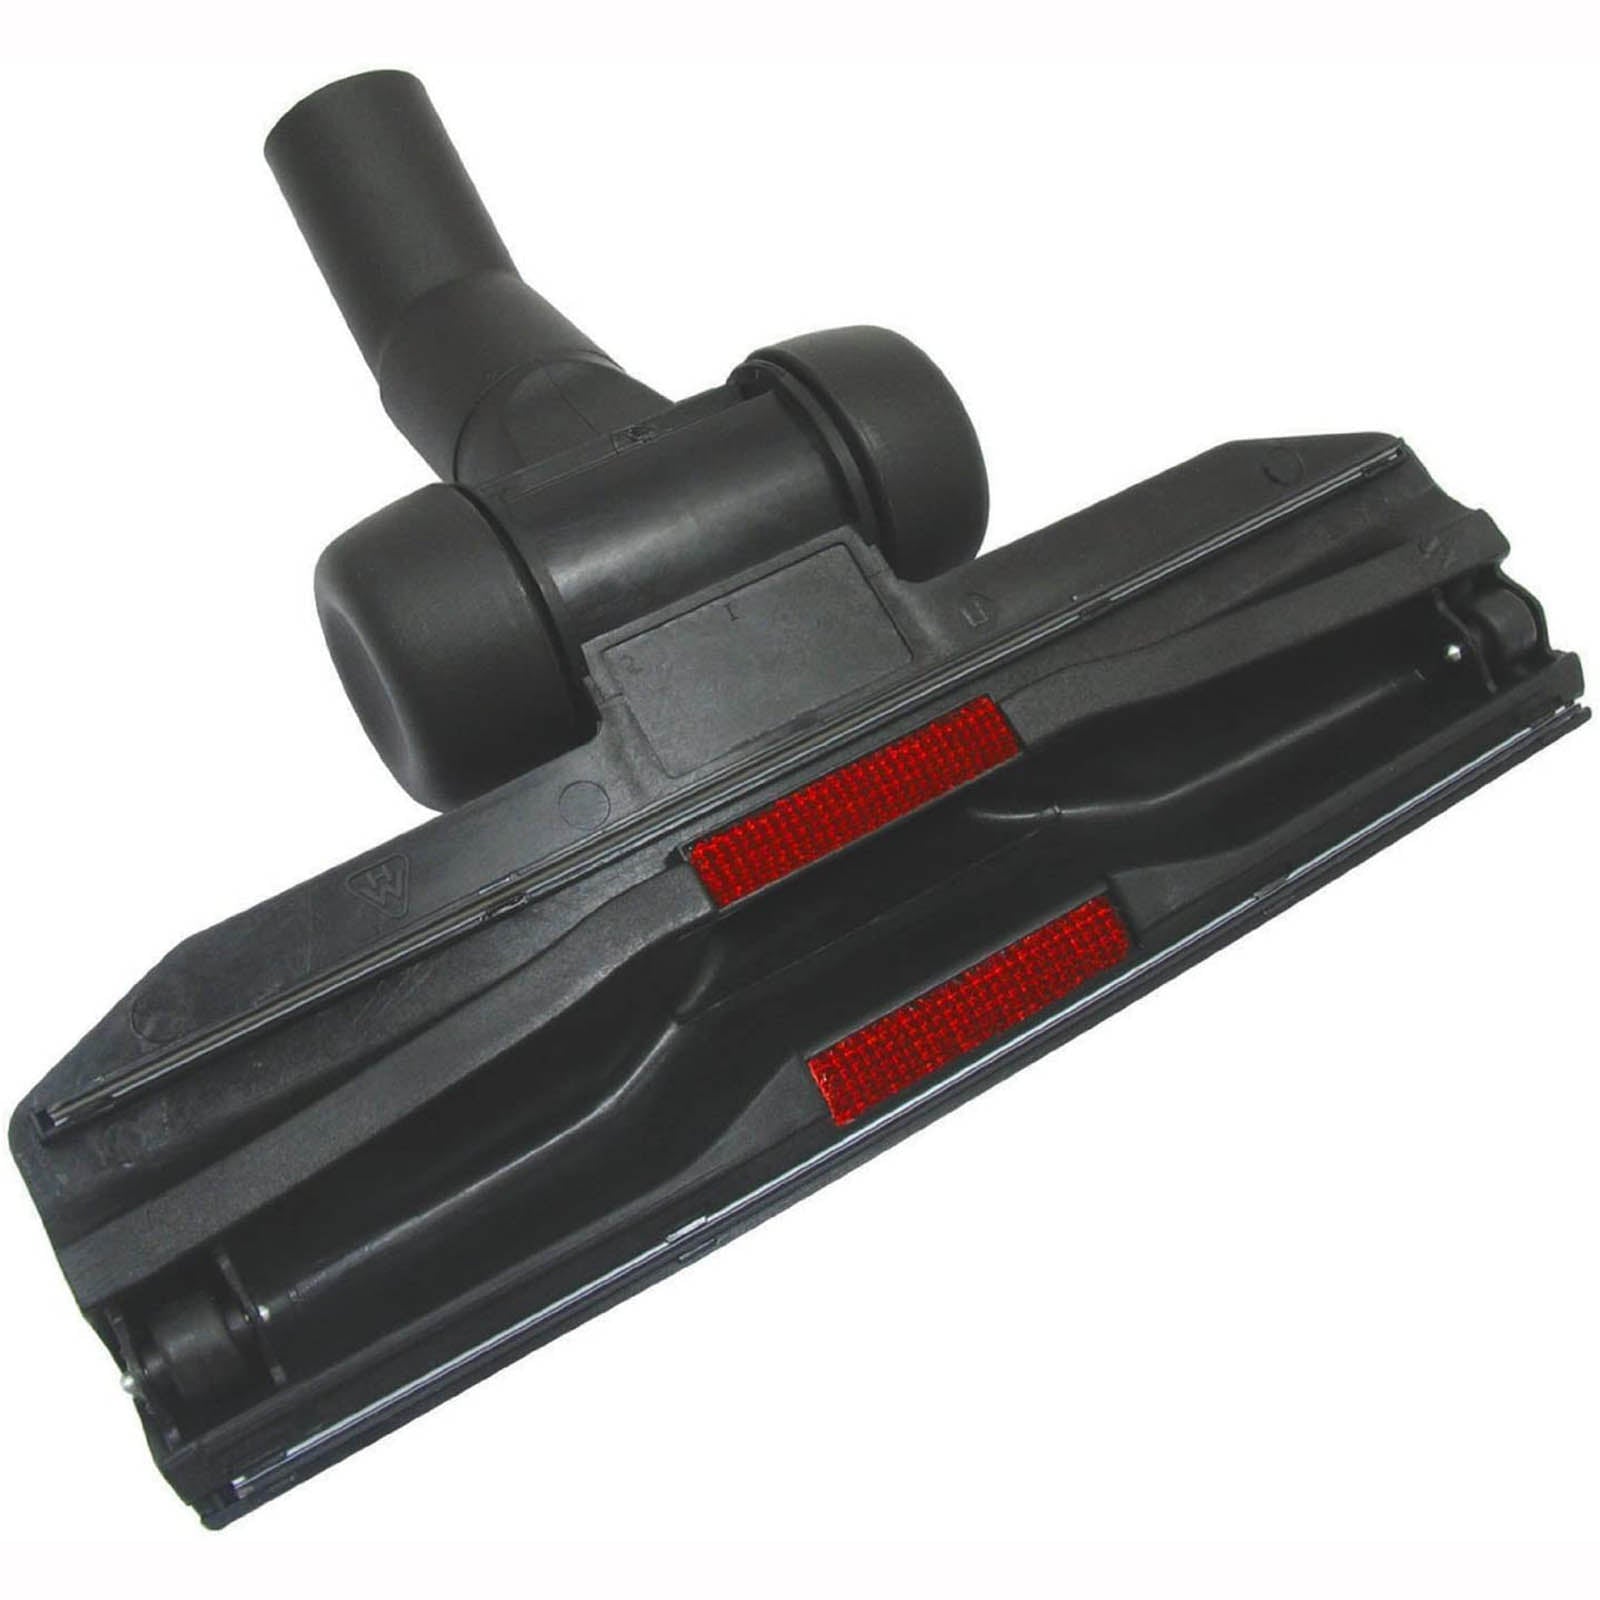 Wheeled Brush For DYSON Deluxe Tool for DC33C DC34 DC37C vacuum